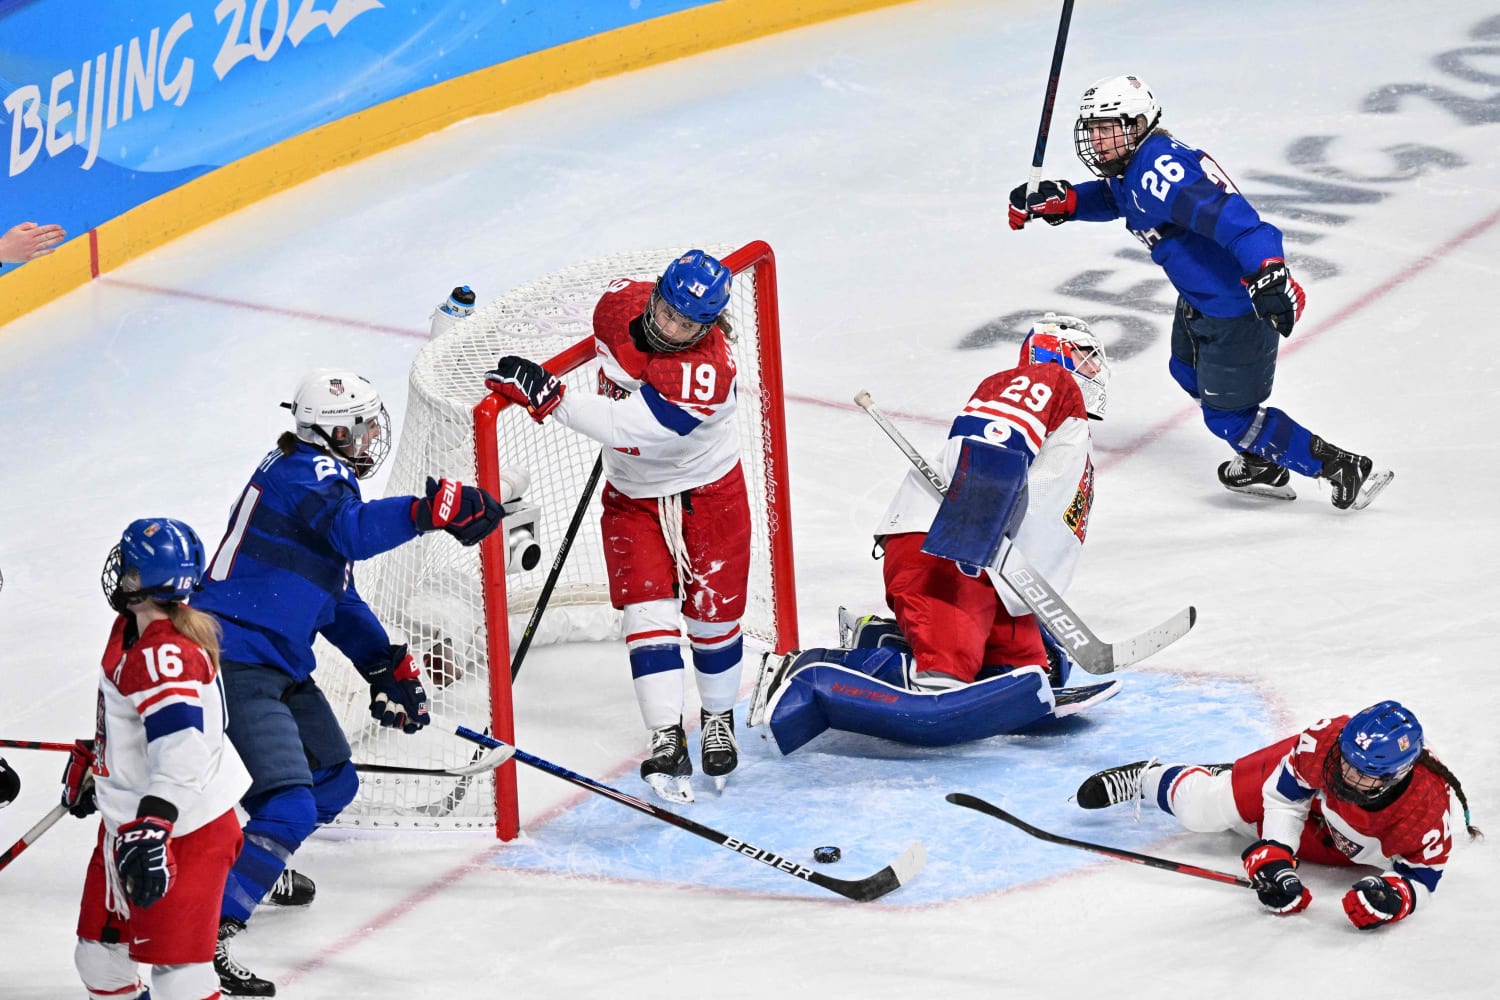 United States women's hockey to face Czech Republic in Olympic quarterfinals